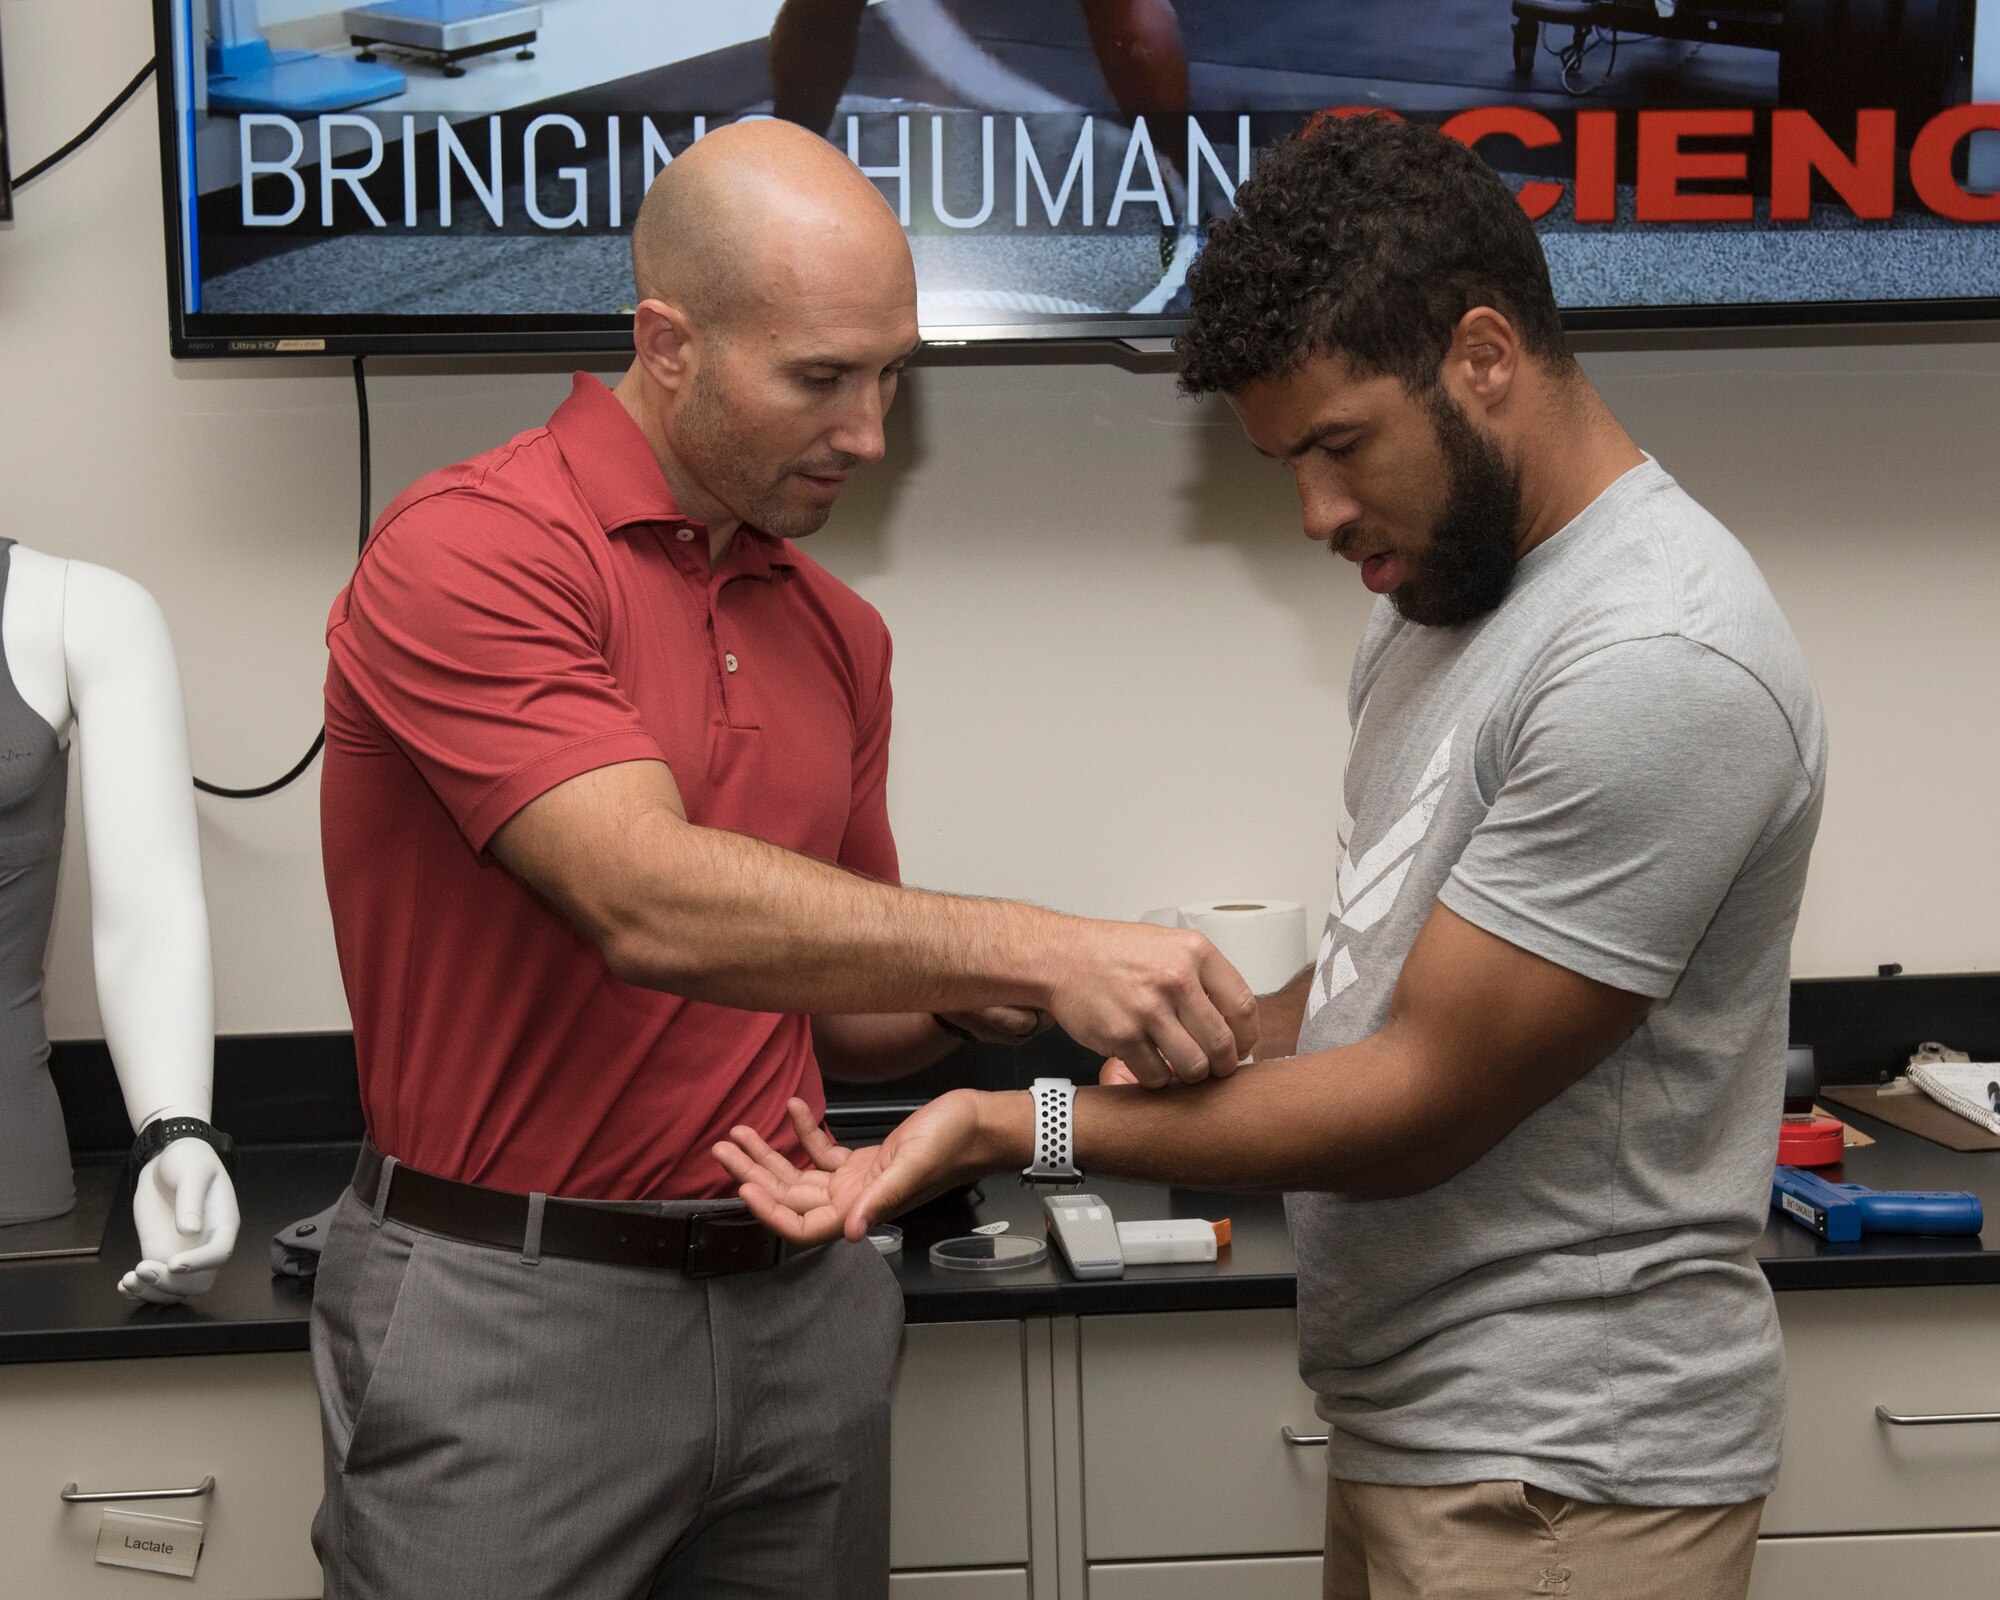 Dr. Adam Strang, 711th Human Performance Wing scientist, applies a sweat sensor patch on NASCAR driver, Darrell “Bubba” Wallace Jr. as part of a demonstration on his tour inside the Strong Lab at the U.S. Air Force School of Aerospace Medicine, Wright-Patterson Air Force Base, Ohio, Sept. 7, 2018. Strang explained how the sweat sensor patch acts as a diagnostic application to monitor cortisol, inflammation and other critical biomarkers. (U.S. Air Force photo by Michelle Gigante)